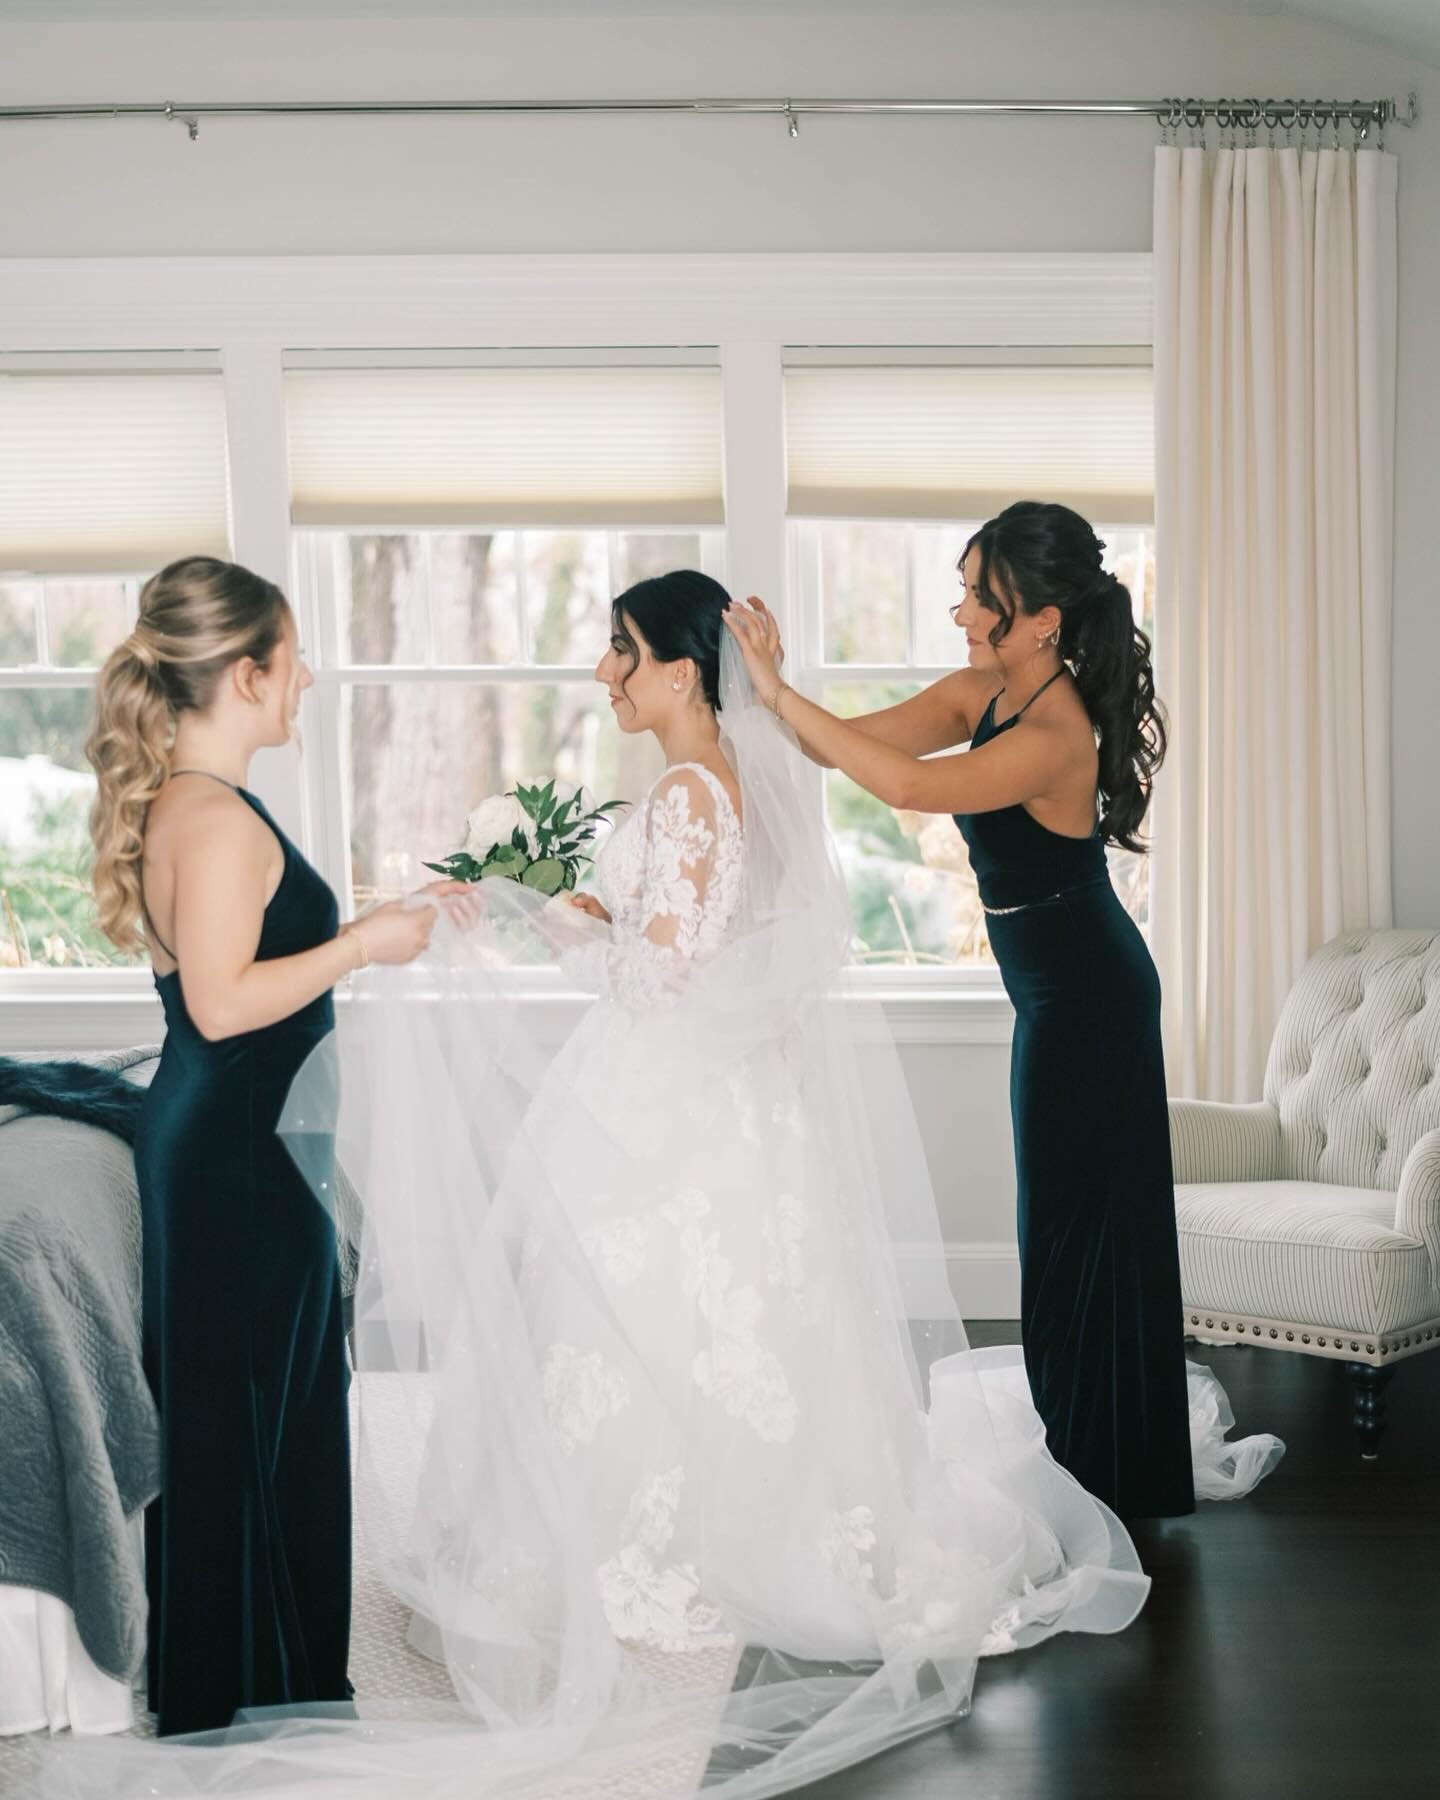 Highlighting bridal party love today. Victoria and her girls made our jobs so dang easy. This was one of the most relaxing mornings ever with one lovely after another in our chair 🤍
.
Hair + Makeup @beyondthebrushli 
Photographer @michellebehrephoto